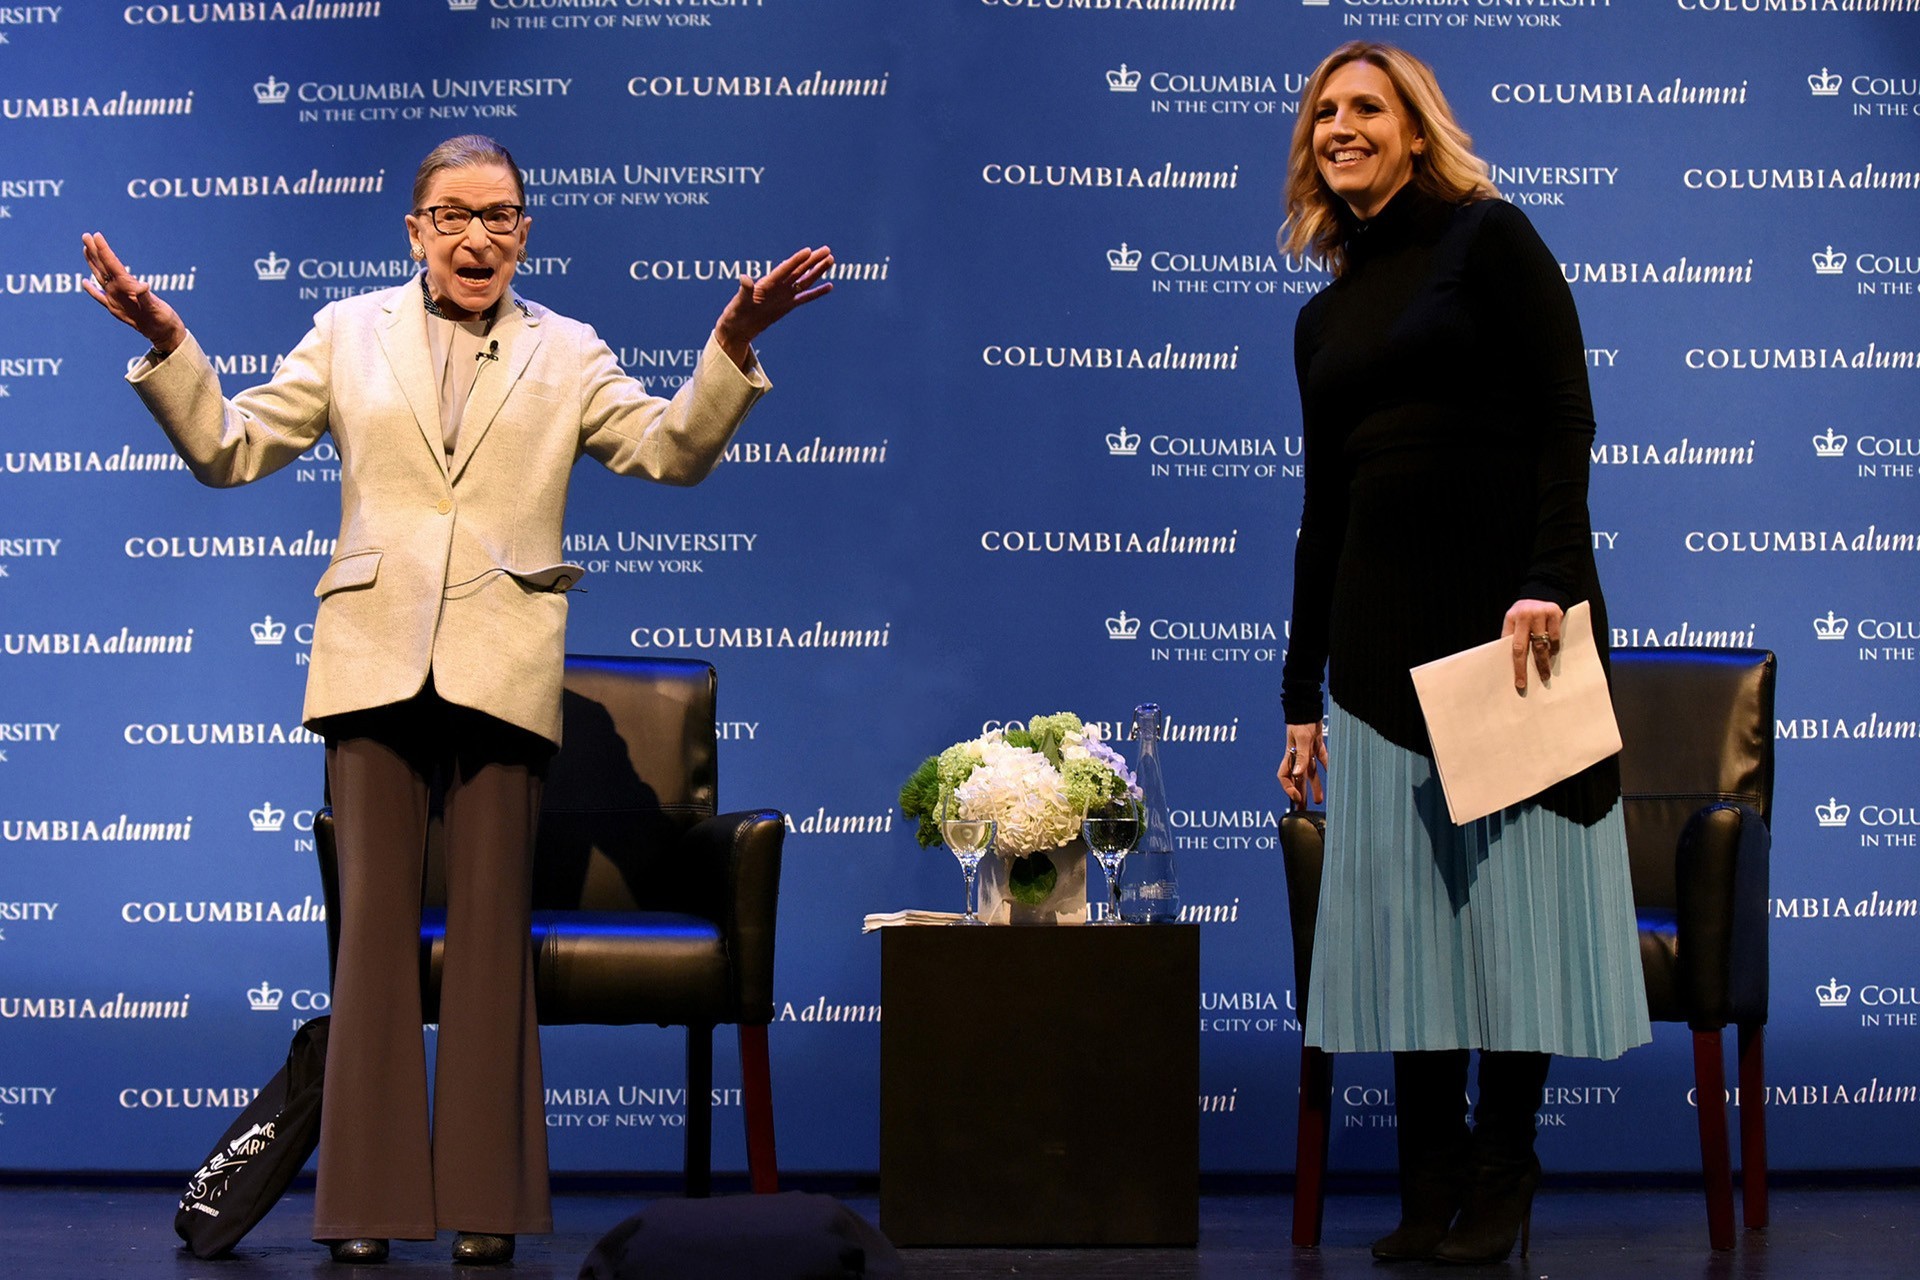 Ruth Bader Ginsberg addressing an audience.